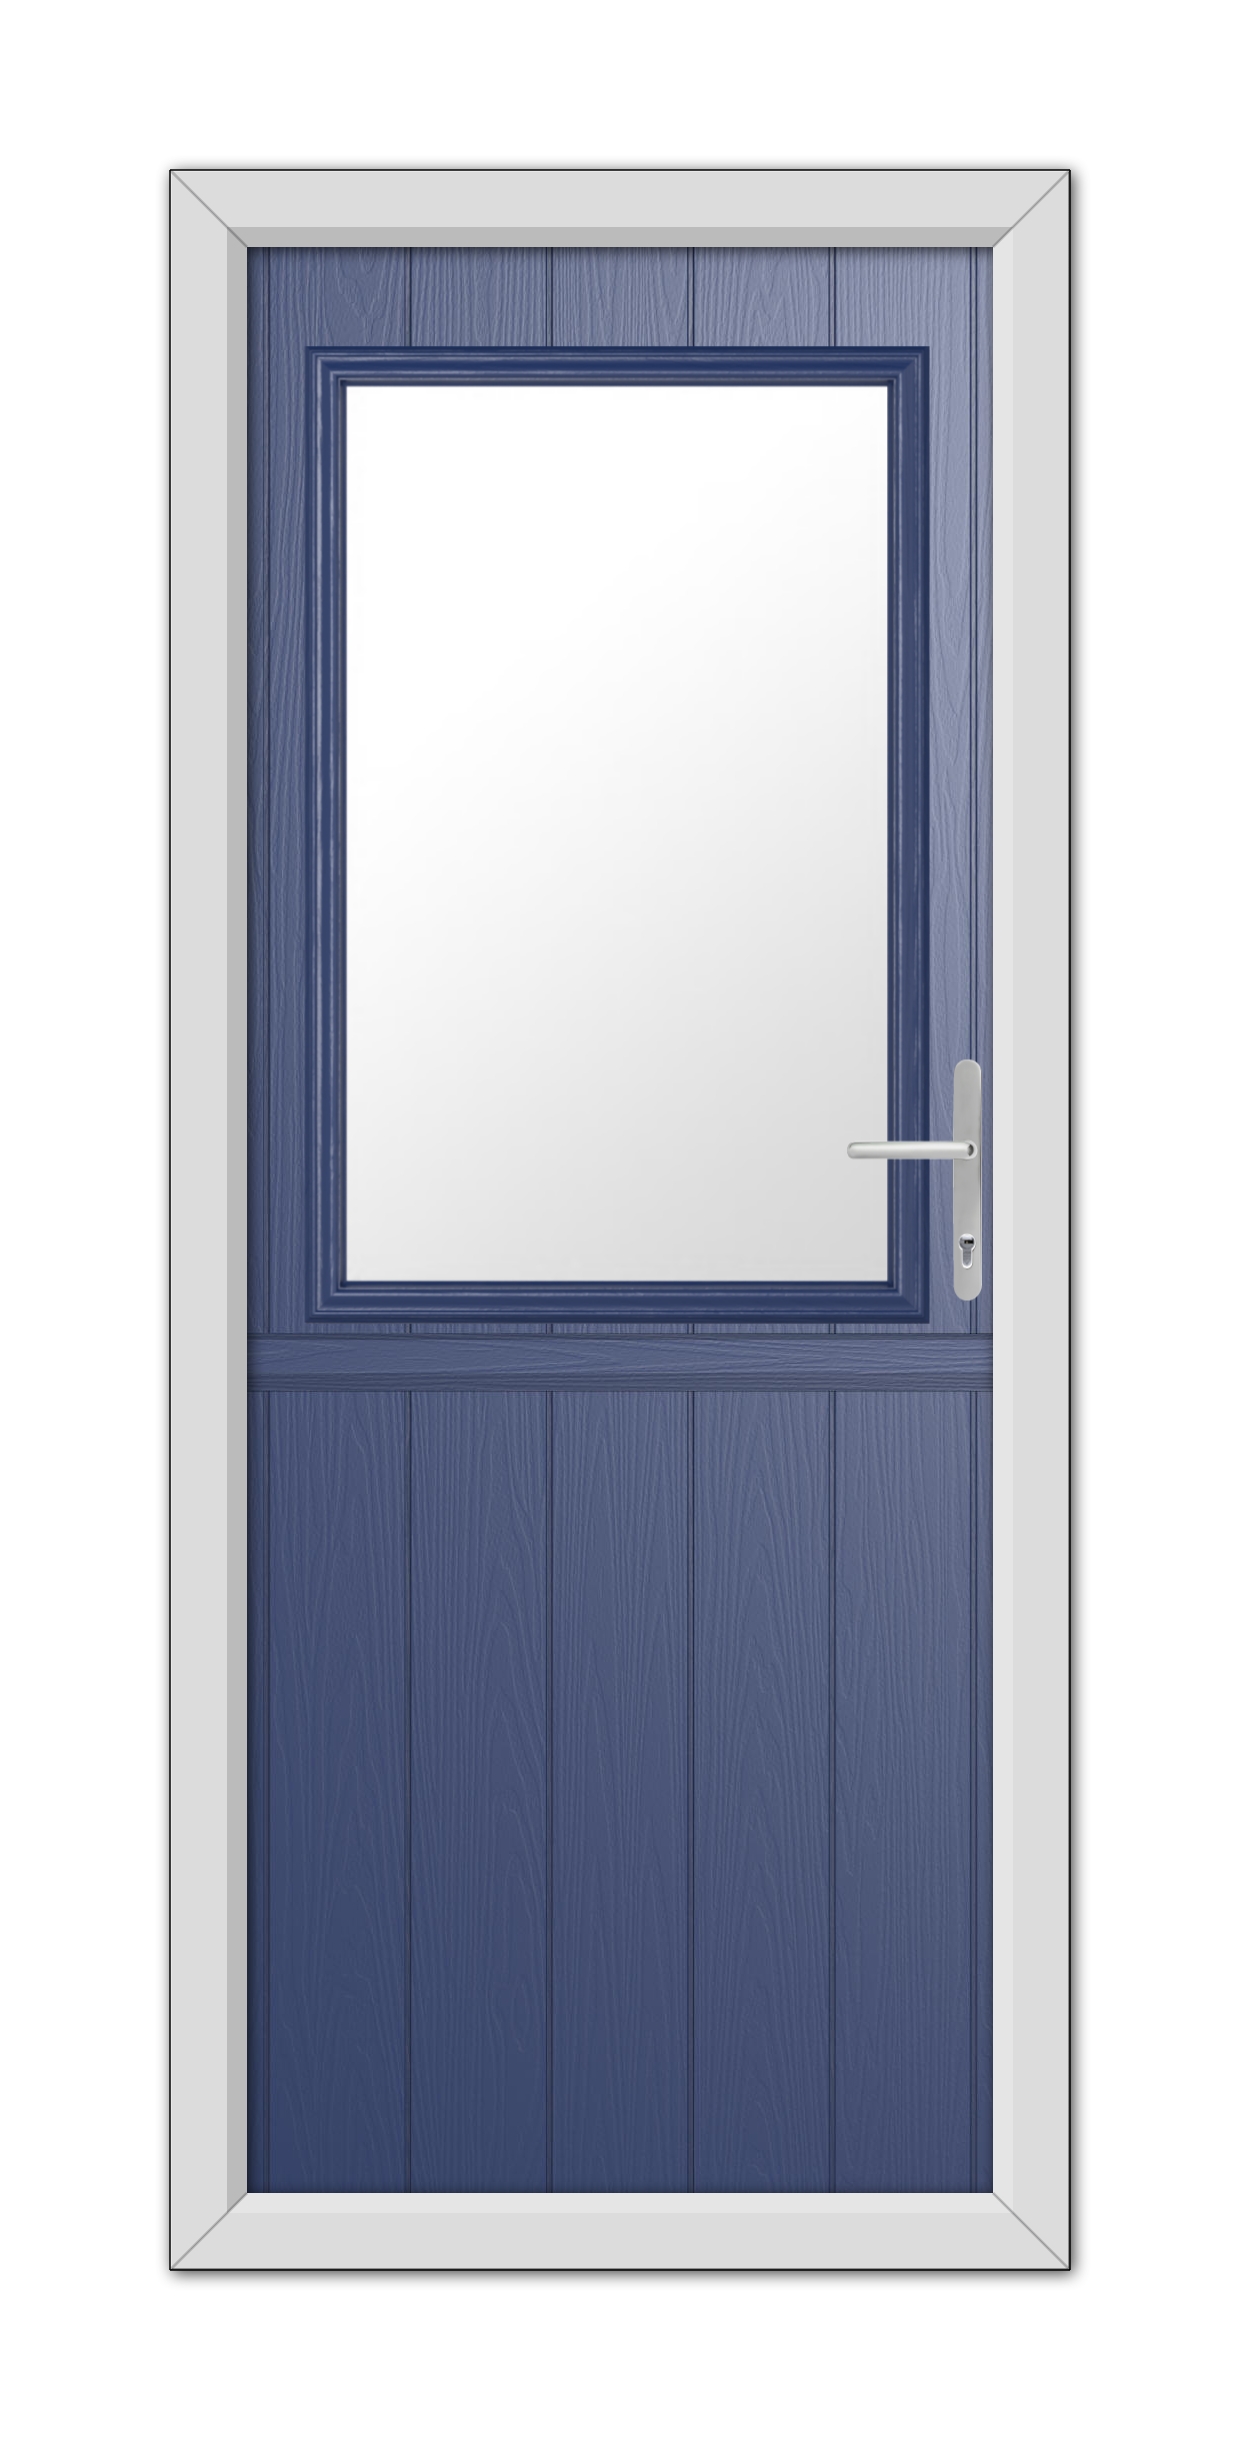 A modern Blue Clifton Stable Composite Door 48mm Timber Core with a large central window, white frame, and a metallic handle, depicted against a white background.